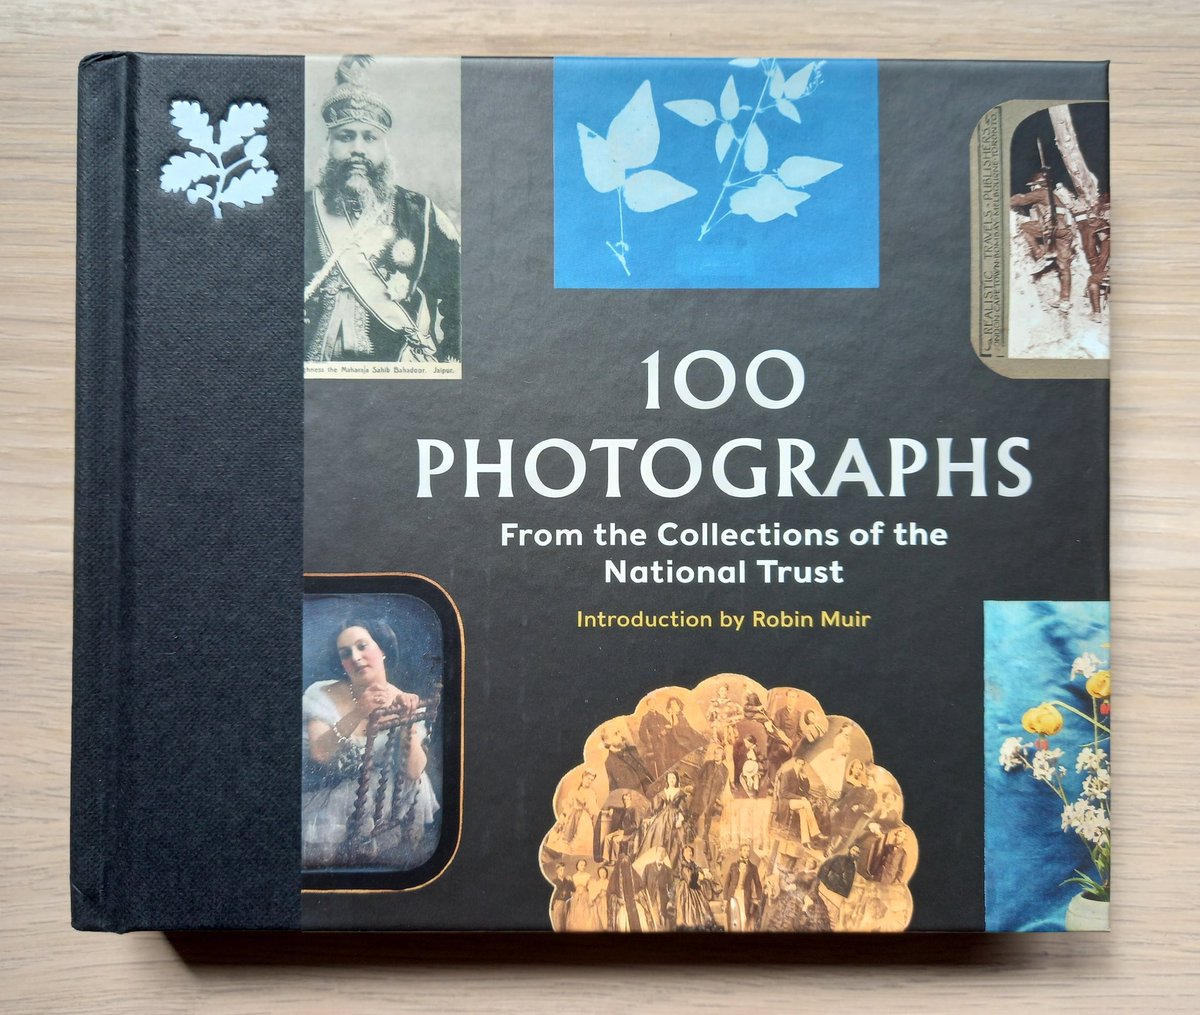 Delighted to receive a copy of 100 Photographs from the collections of the National Trust. A fascinating selection of images with engaging well researched text by @anna_sparham & introduction by Robin Muir. Great privilege to have assisted with Anna Atkins and Constance Talbot.